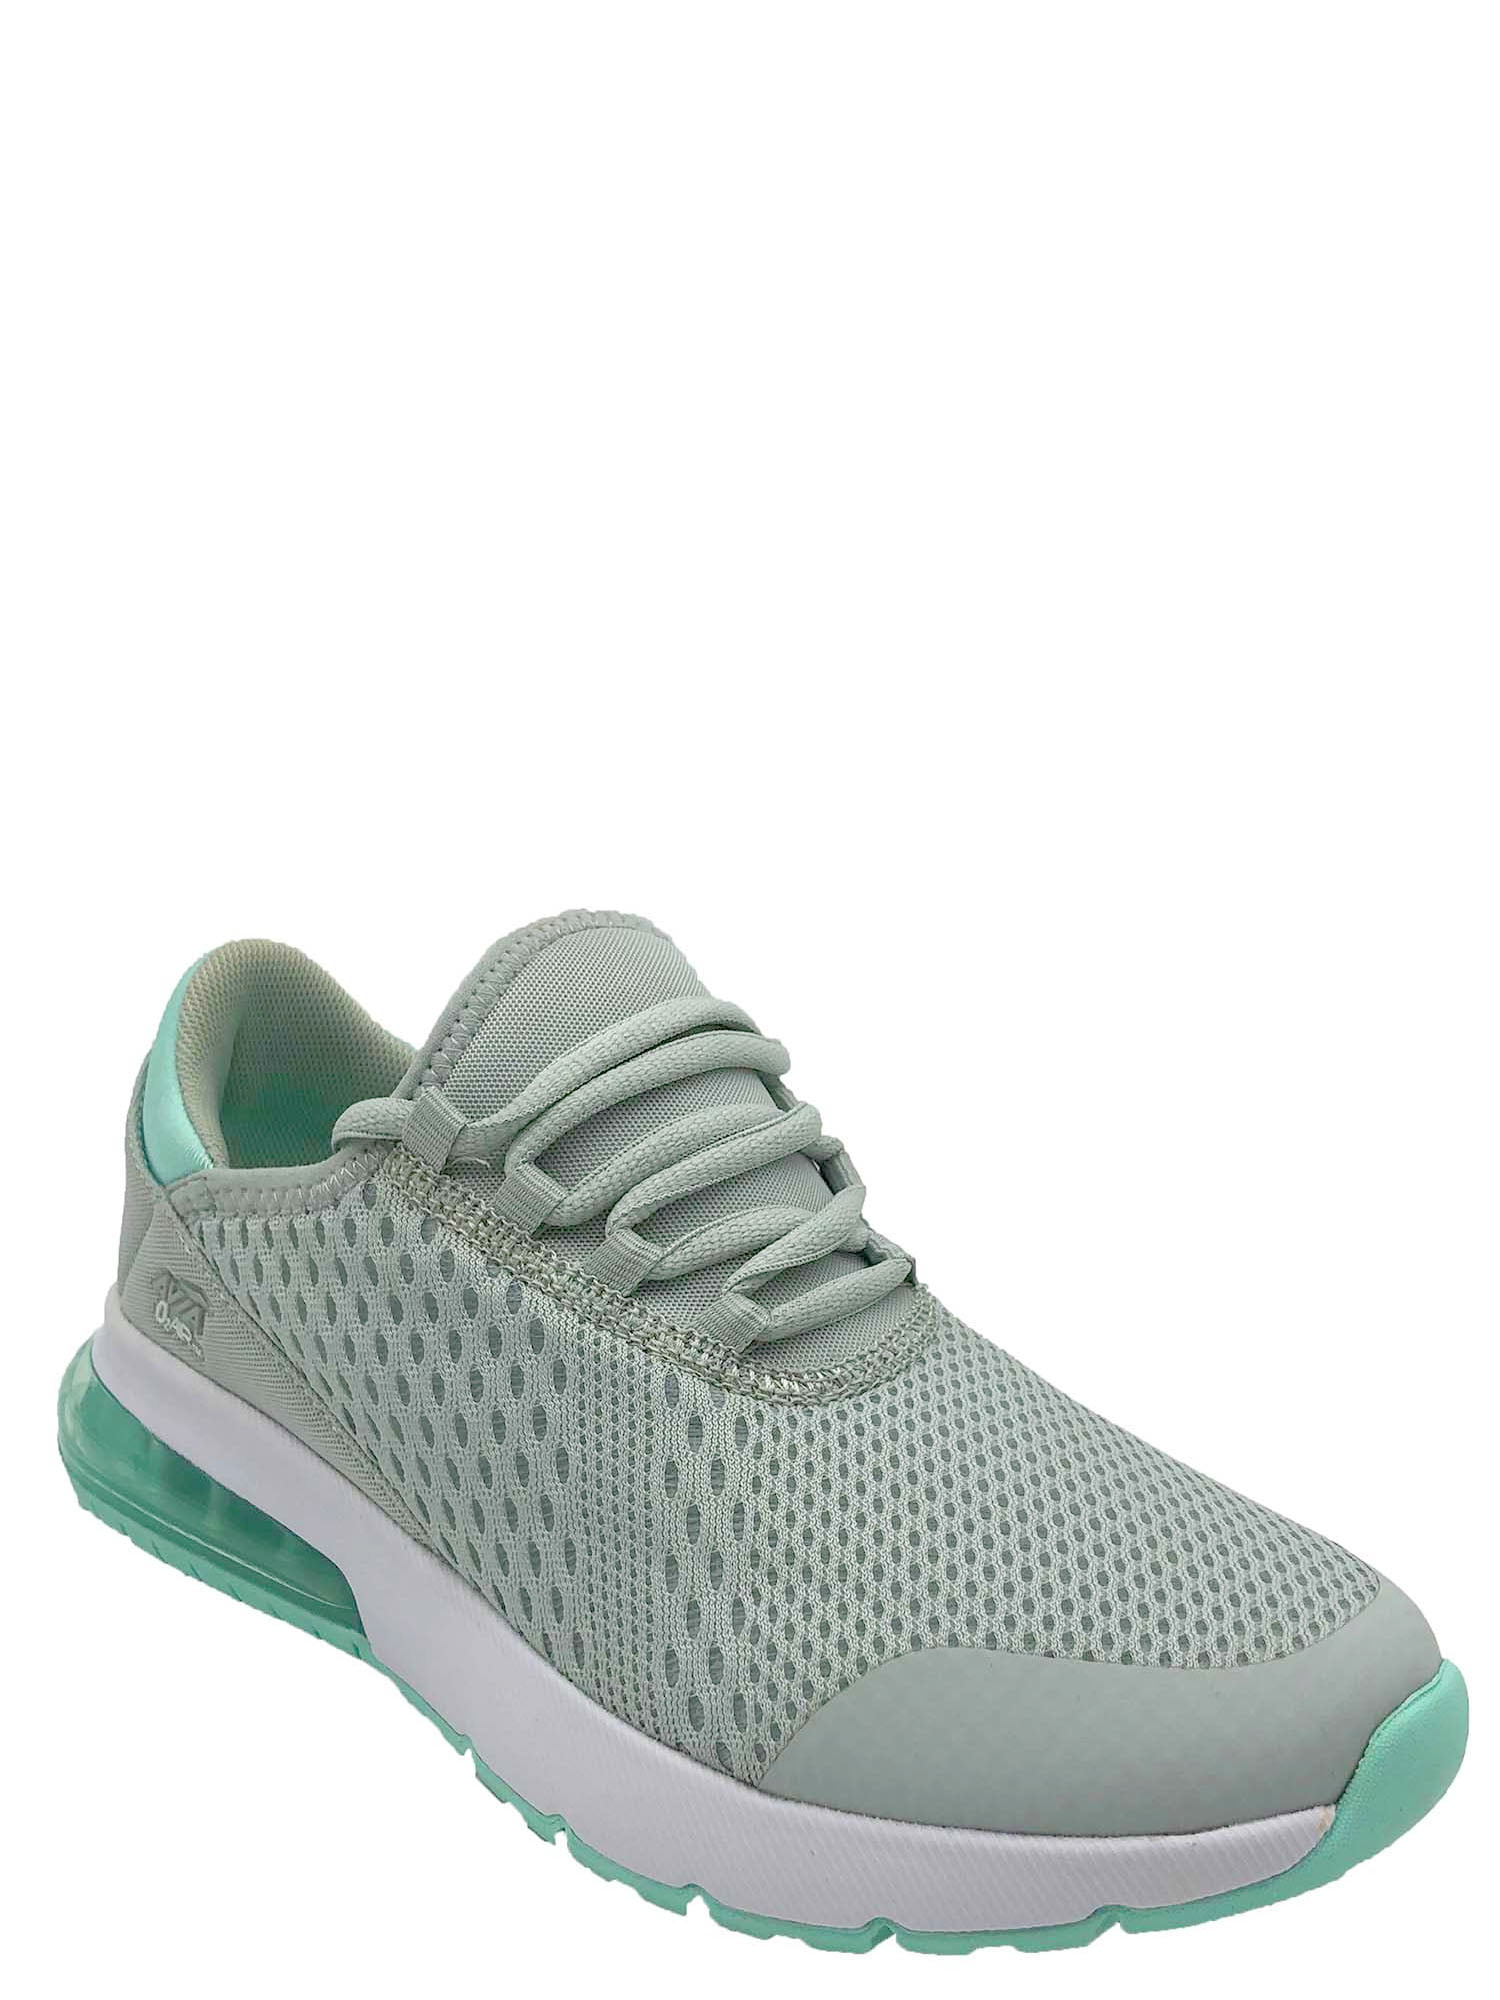 Avia Women's A9999W Athletic Shoes - White/Grey/Light Green Sports